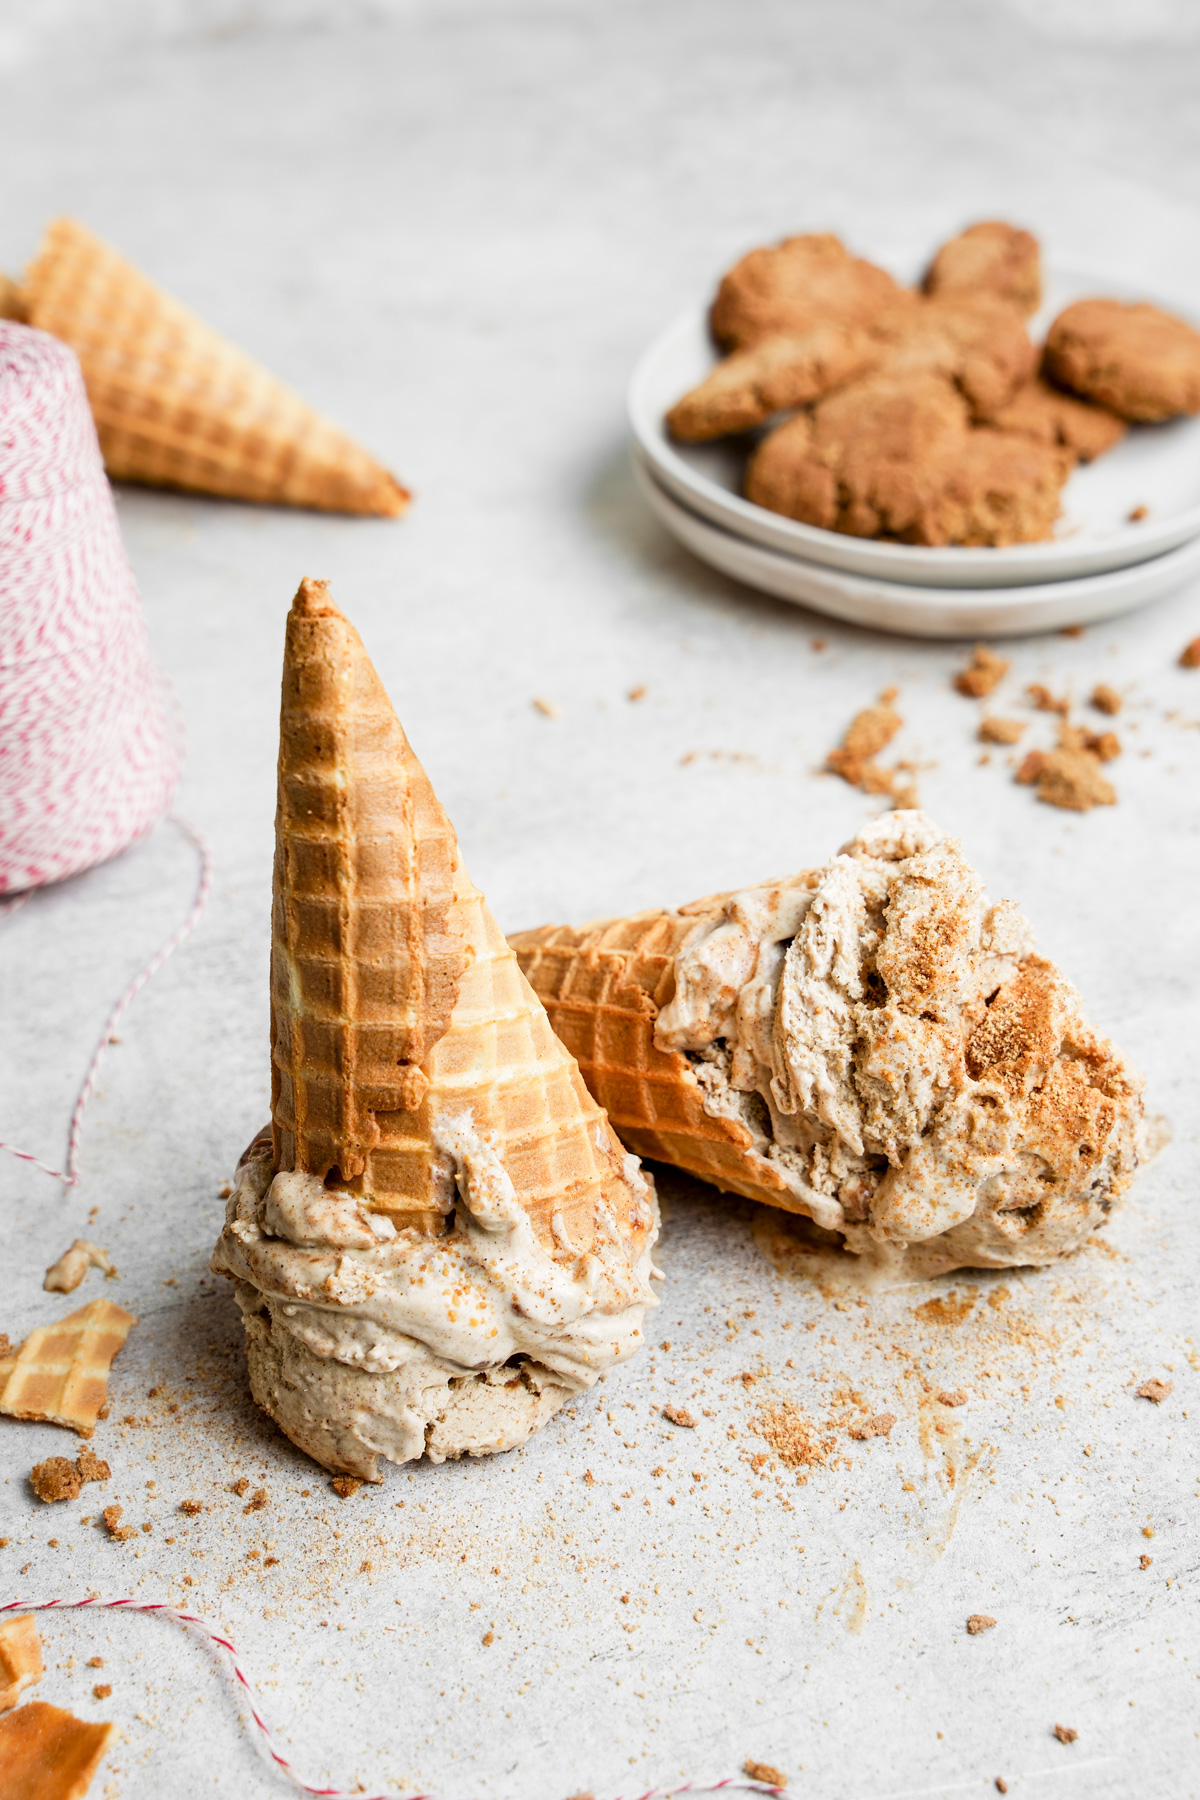 the healthy vegan ice cream flipped over to show the creamy texture